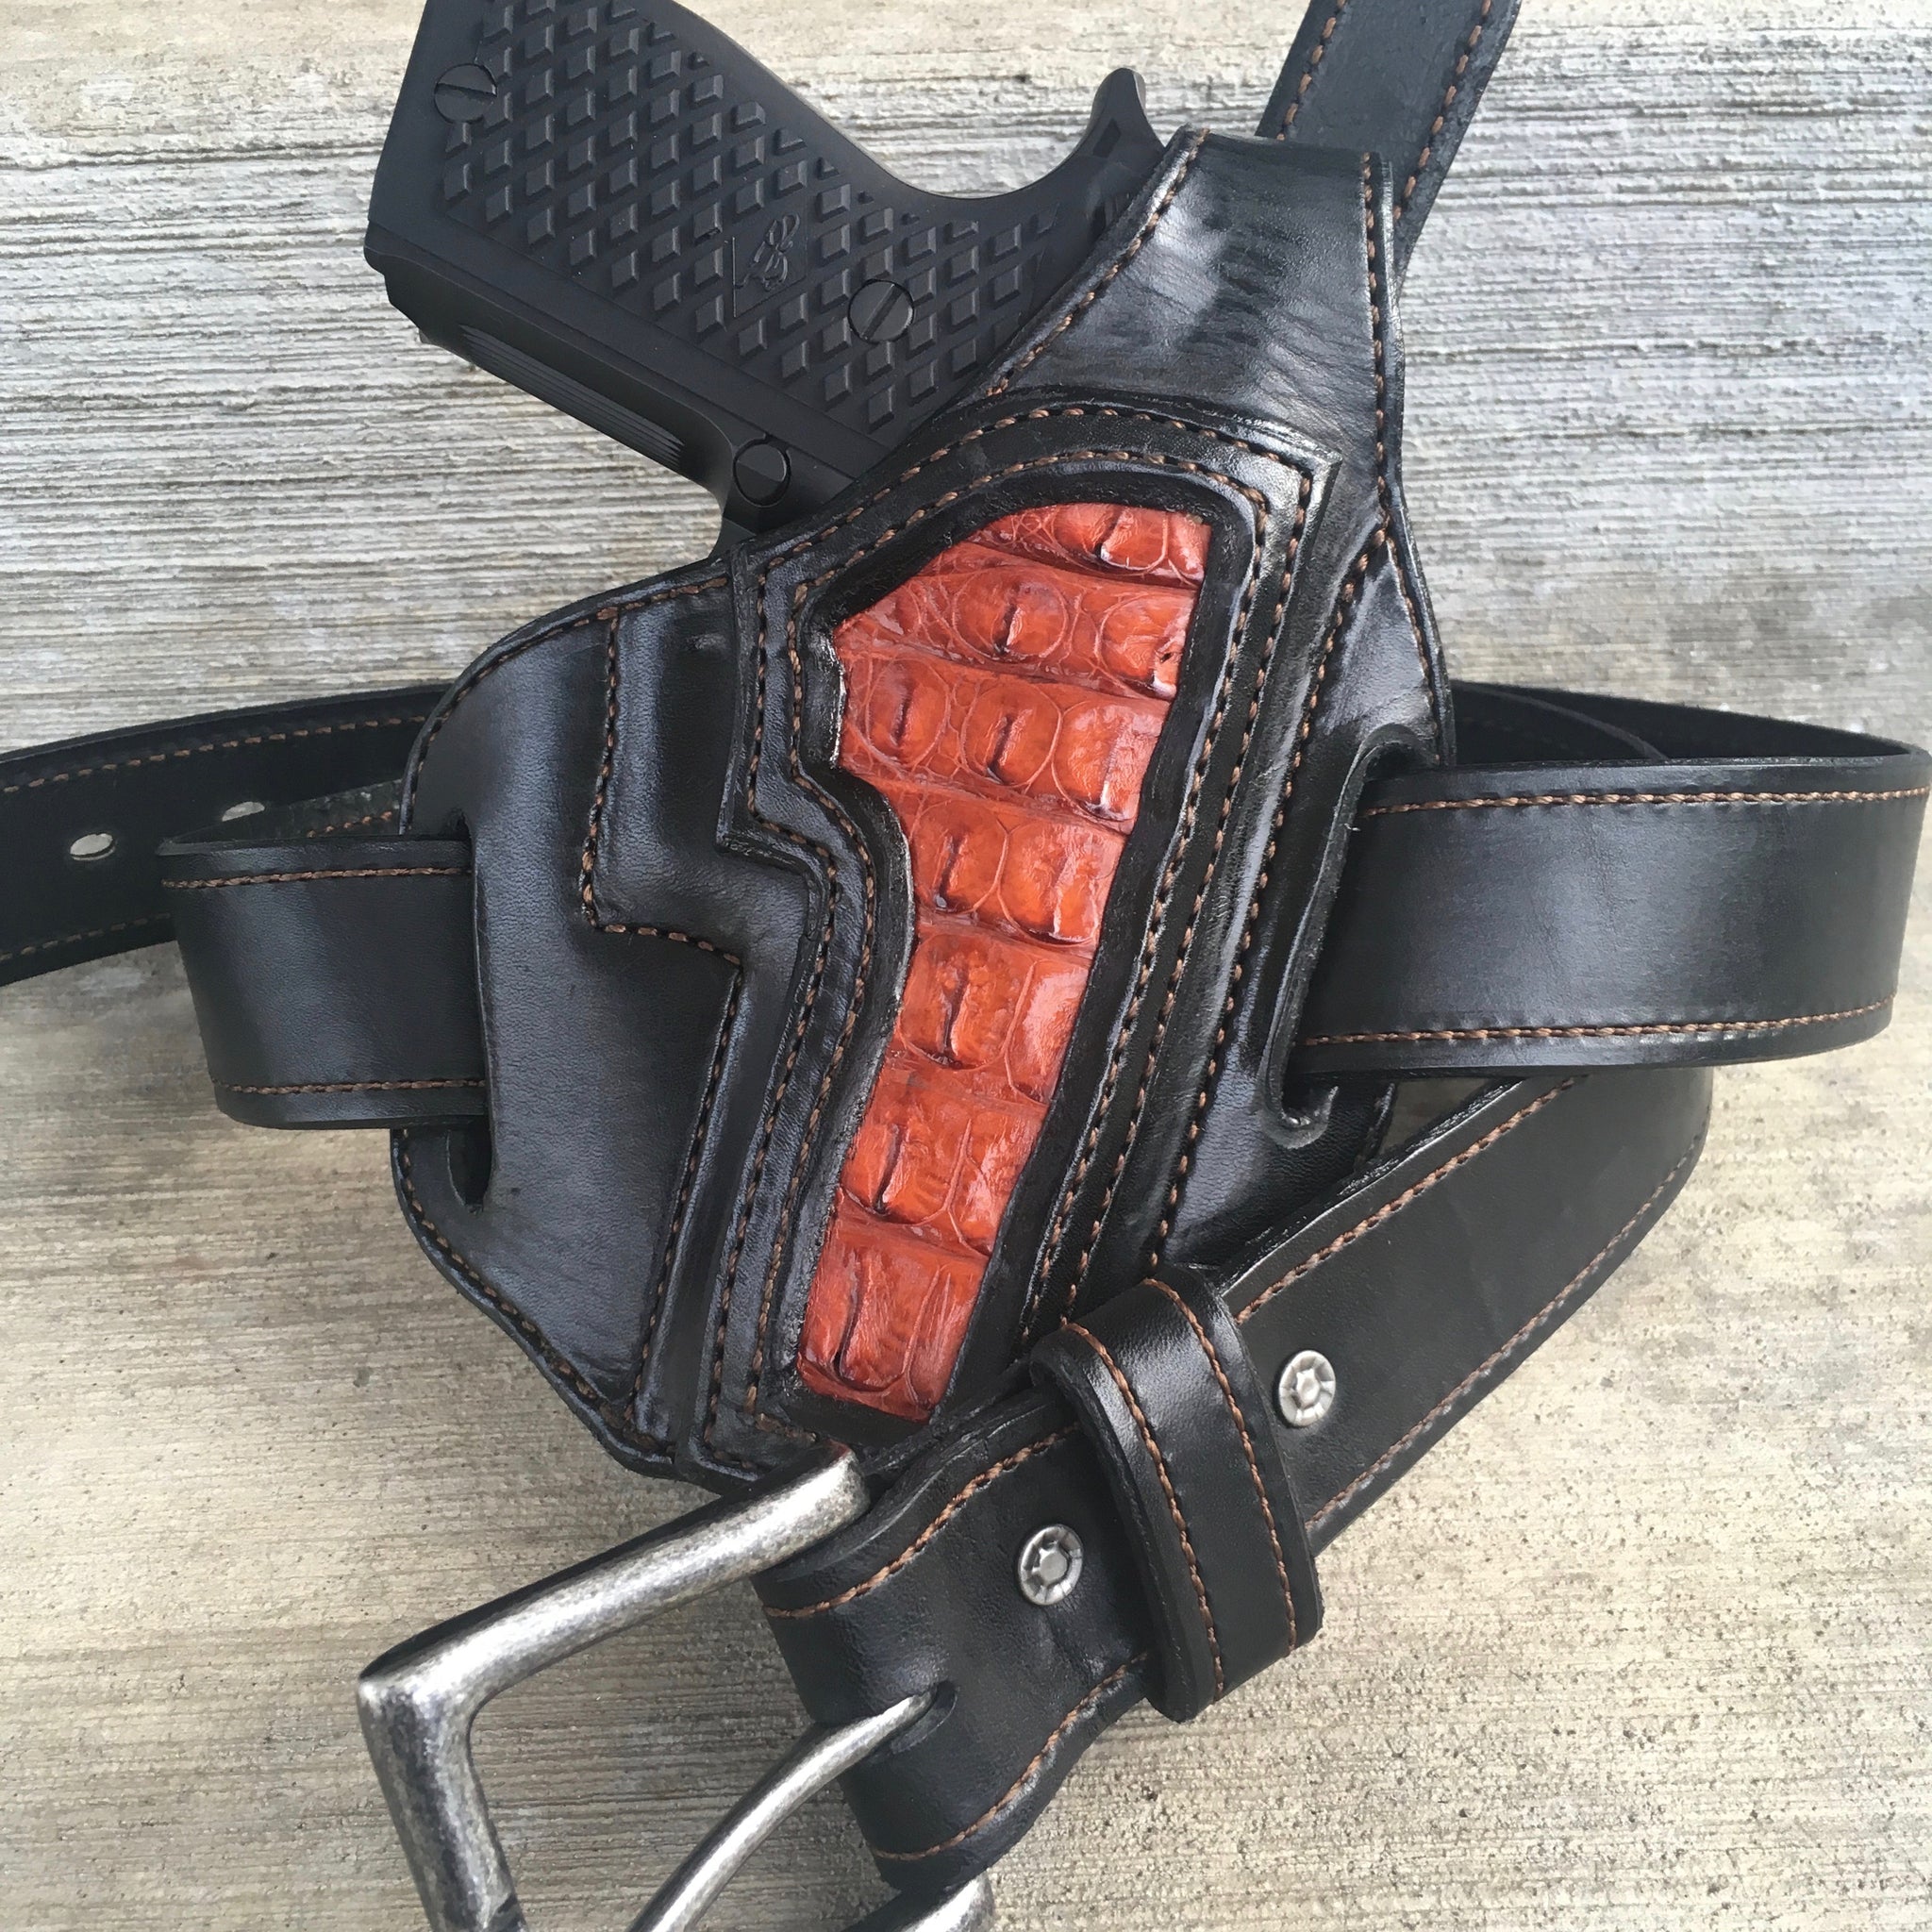 Leather Holster, Chest Holster, Shoulder Holster, Panhandle Red Leather Company, Post Falls, Idaho. Leather Holsters, Leather Shoulder Holsters, Personalized Leather Gifts. Purses, Tote Bags, Leather Belts. USA.